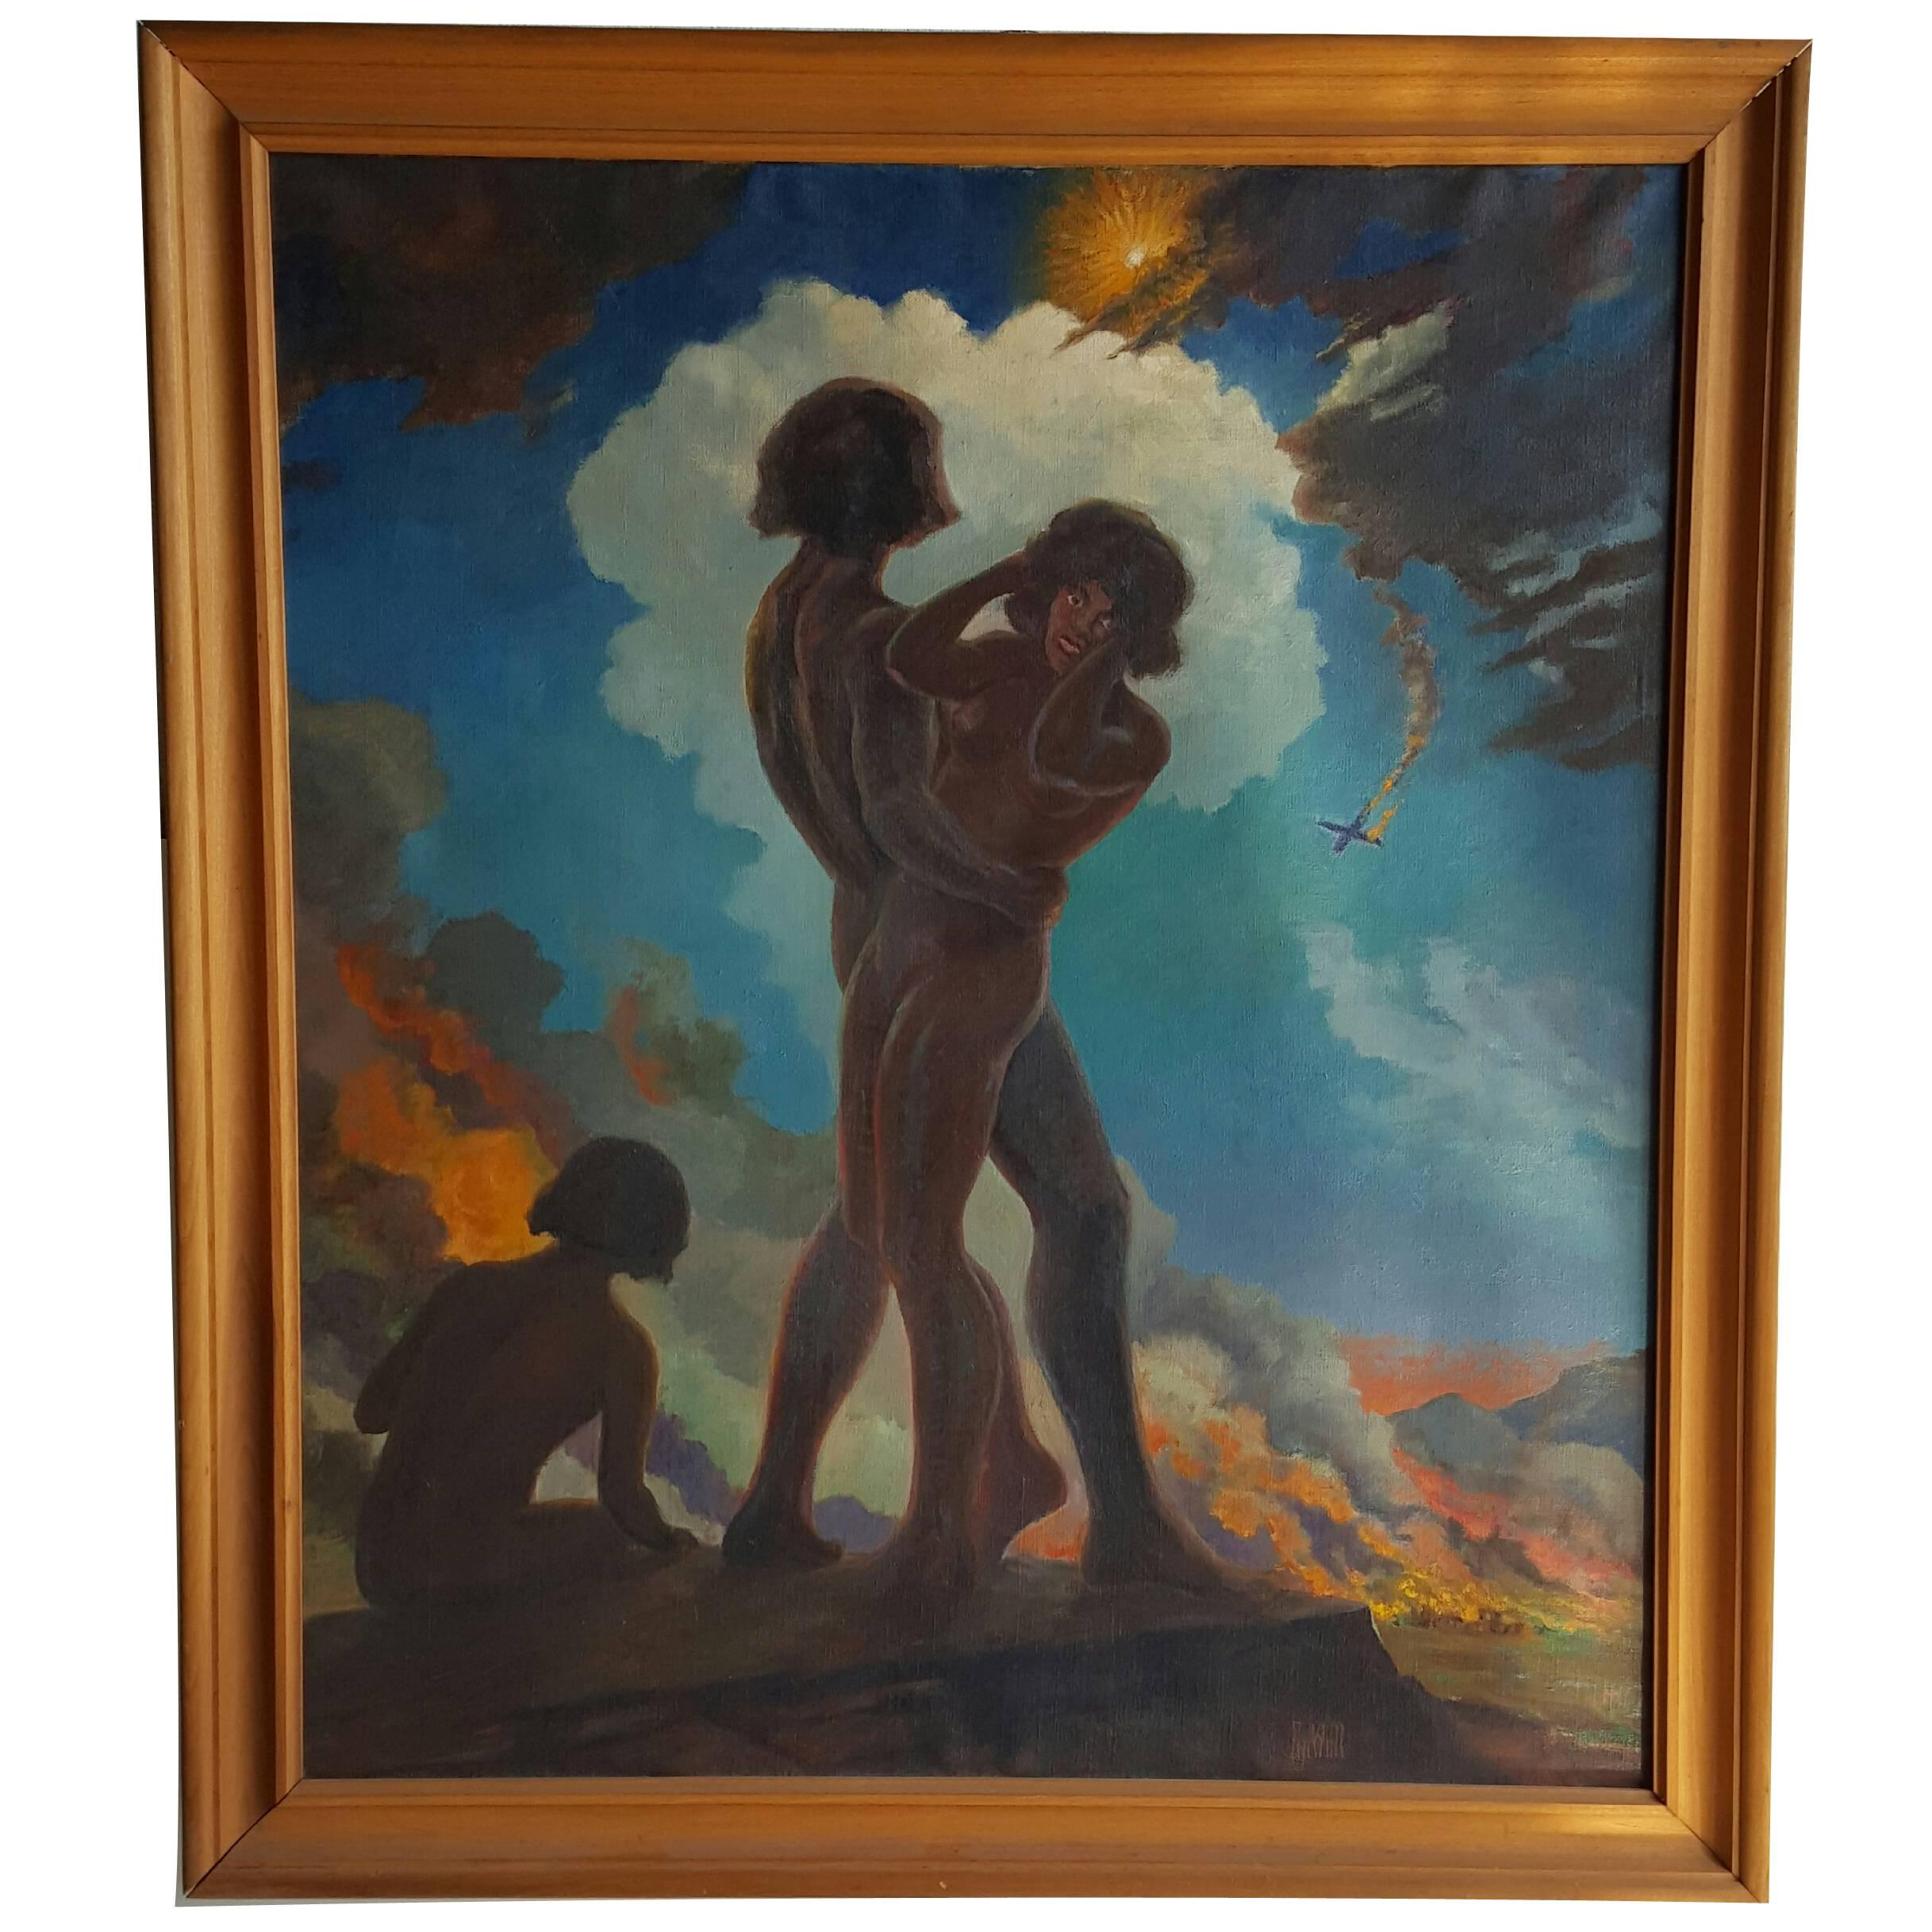 Large American Romantic Surrealism Oil Painting by Francis W. Cowell, circa 1949